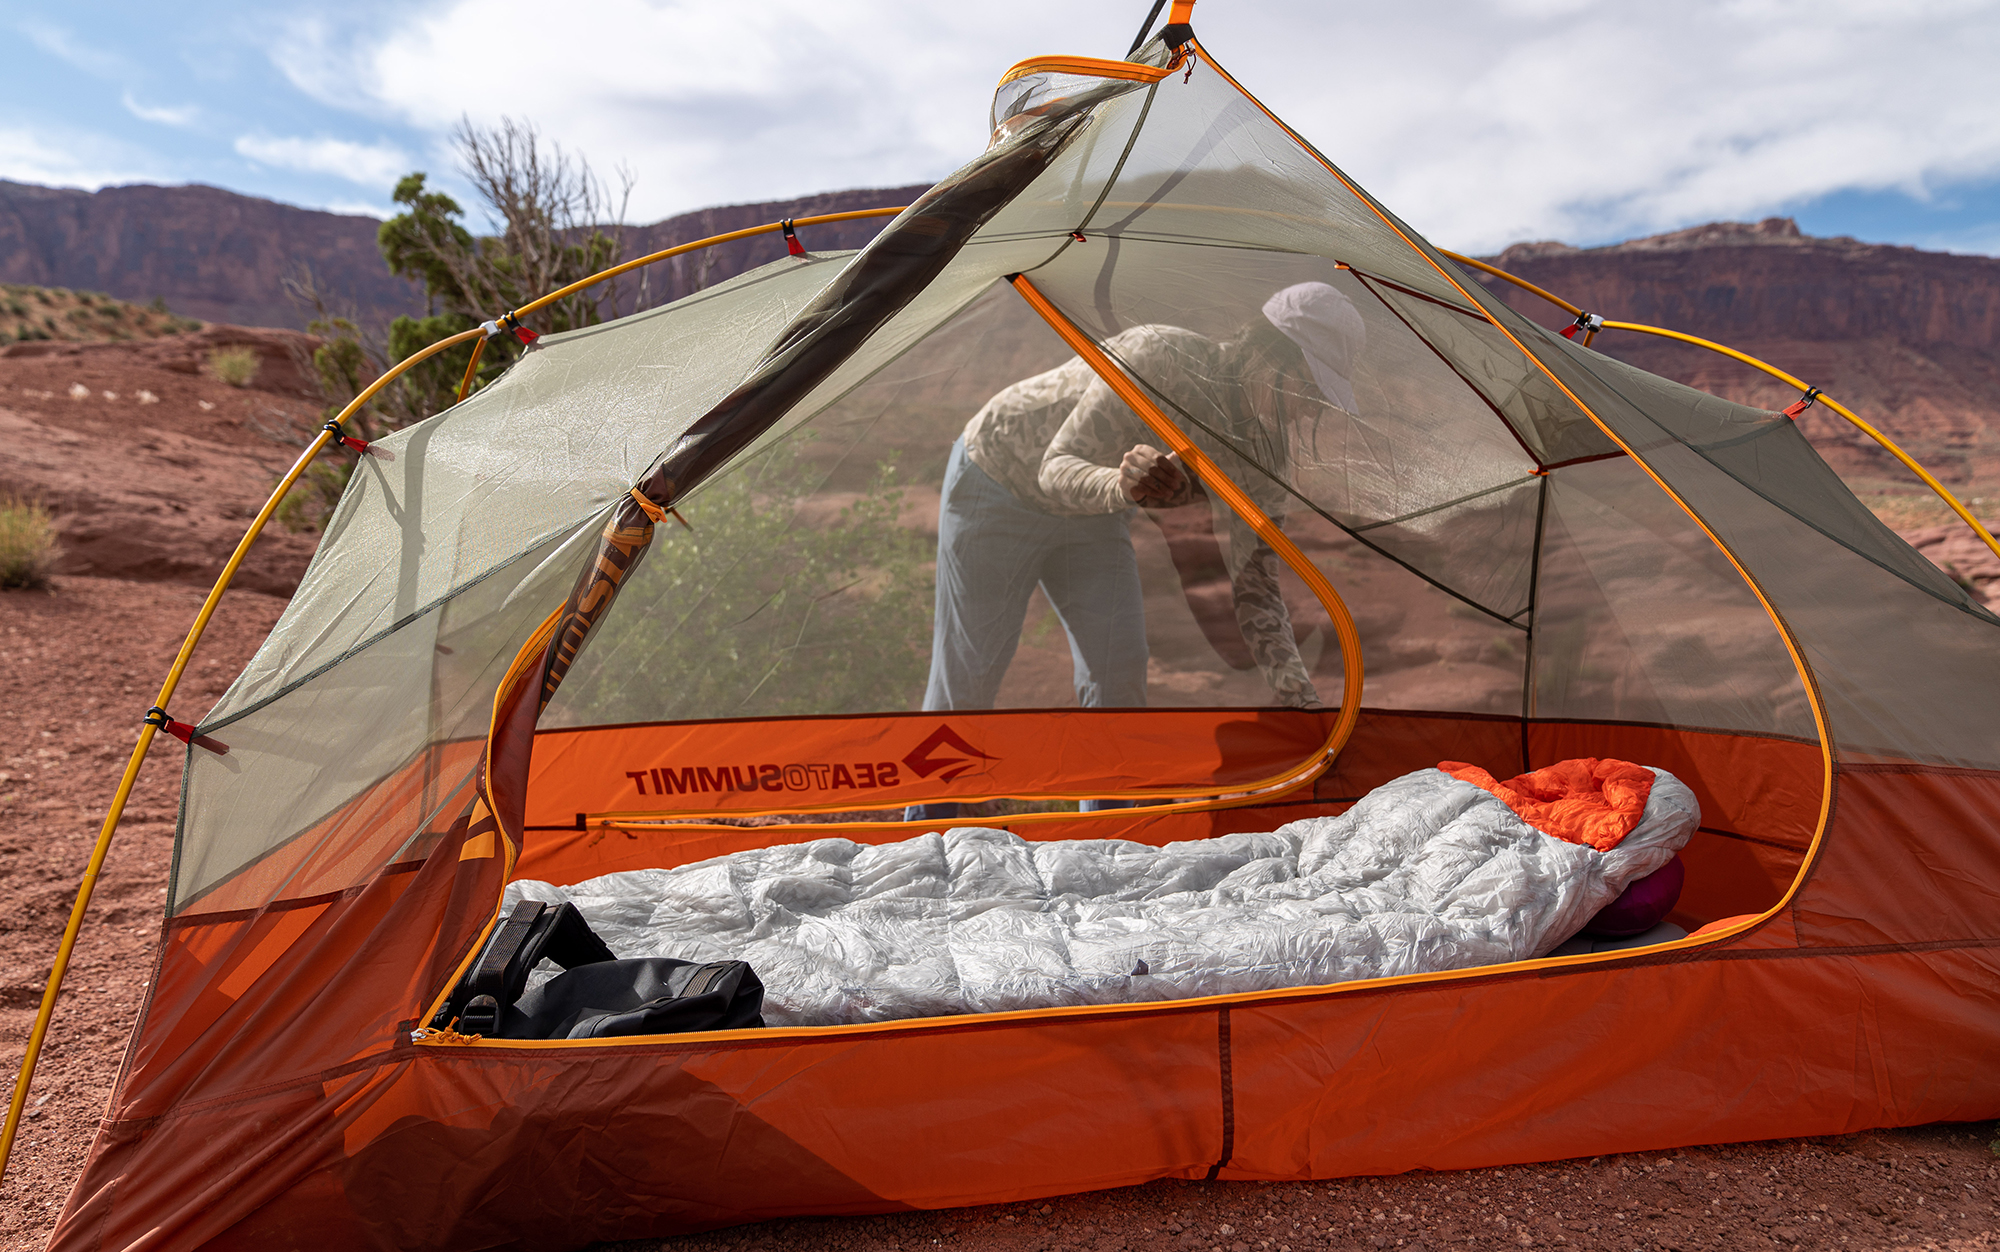 The 15 best camping and backpacking pillows in 2023